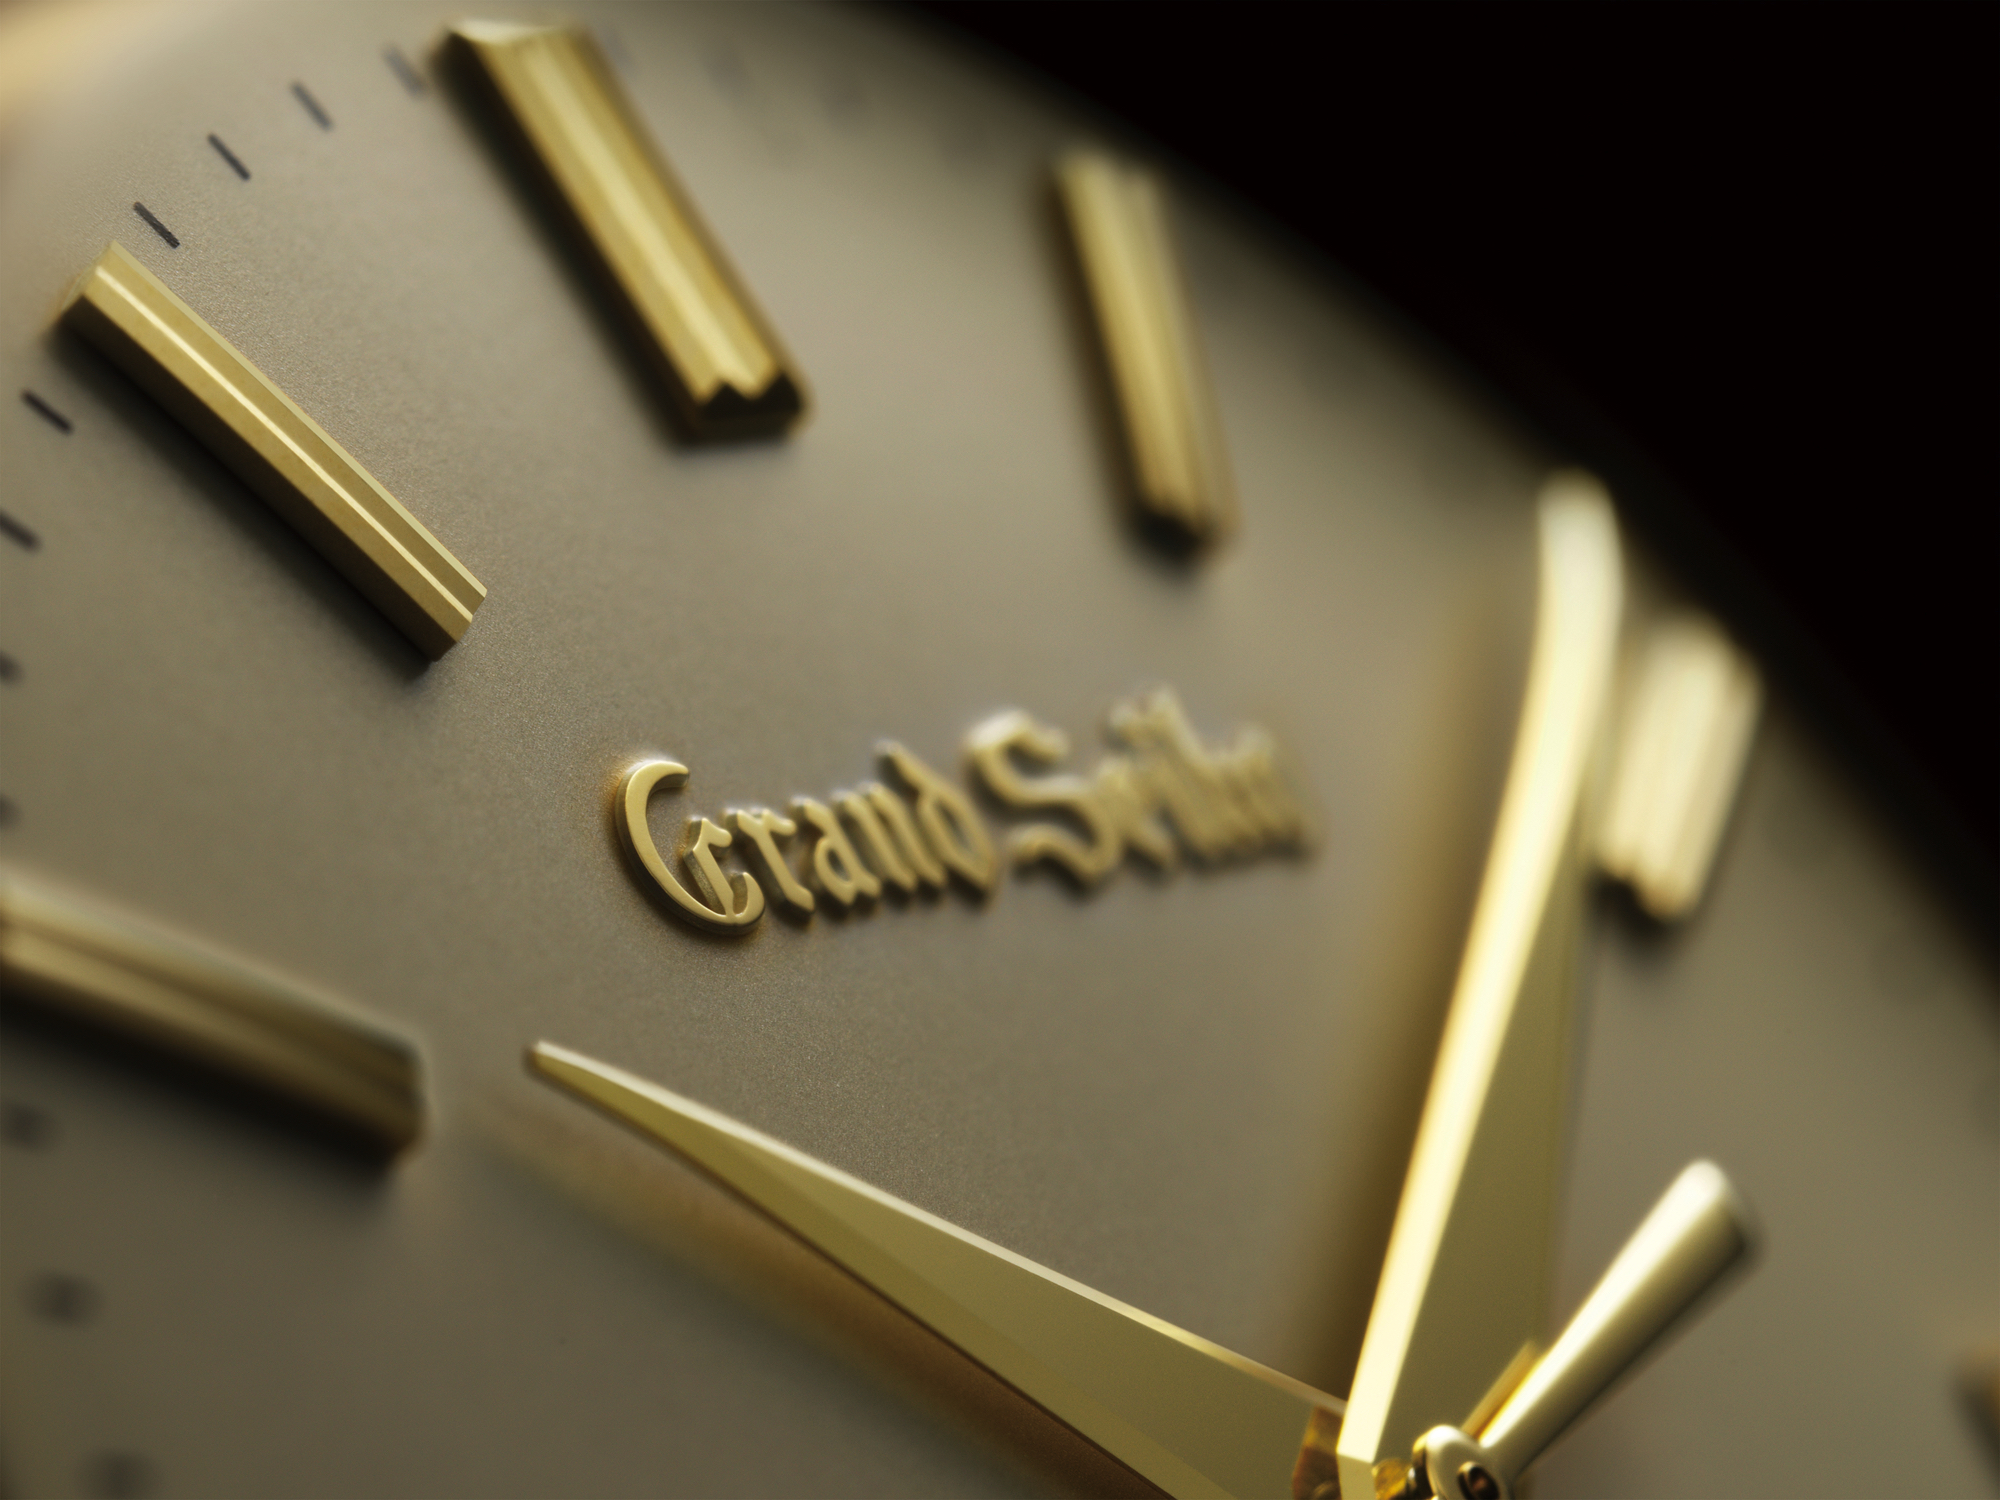 Grand Seiko recreates its first watch for 60th Anniversary